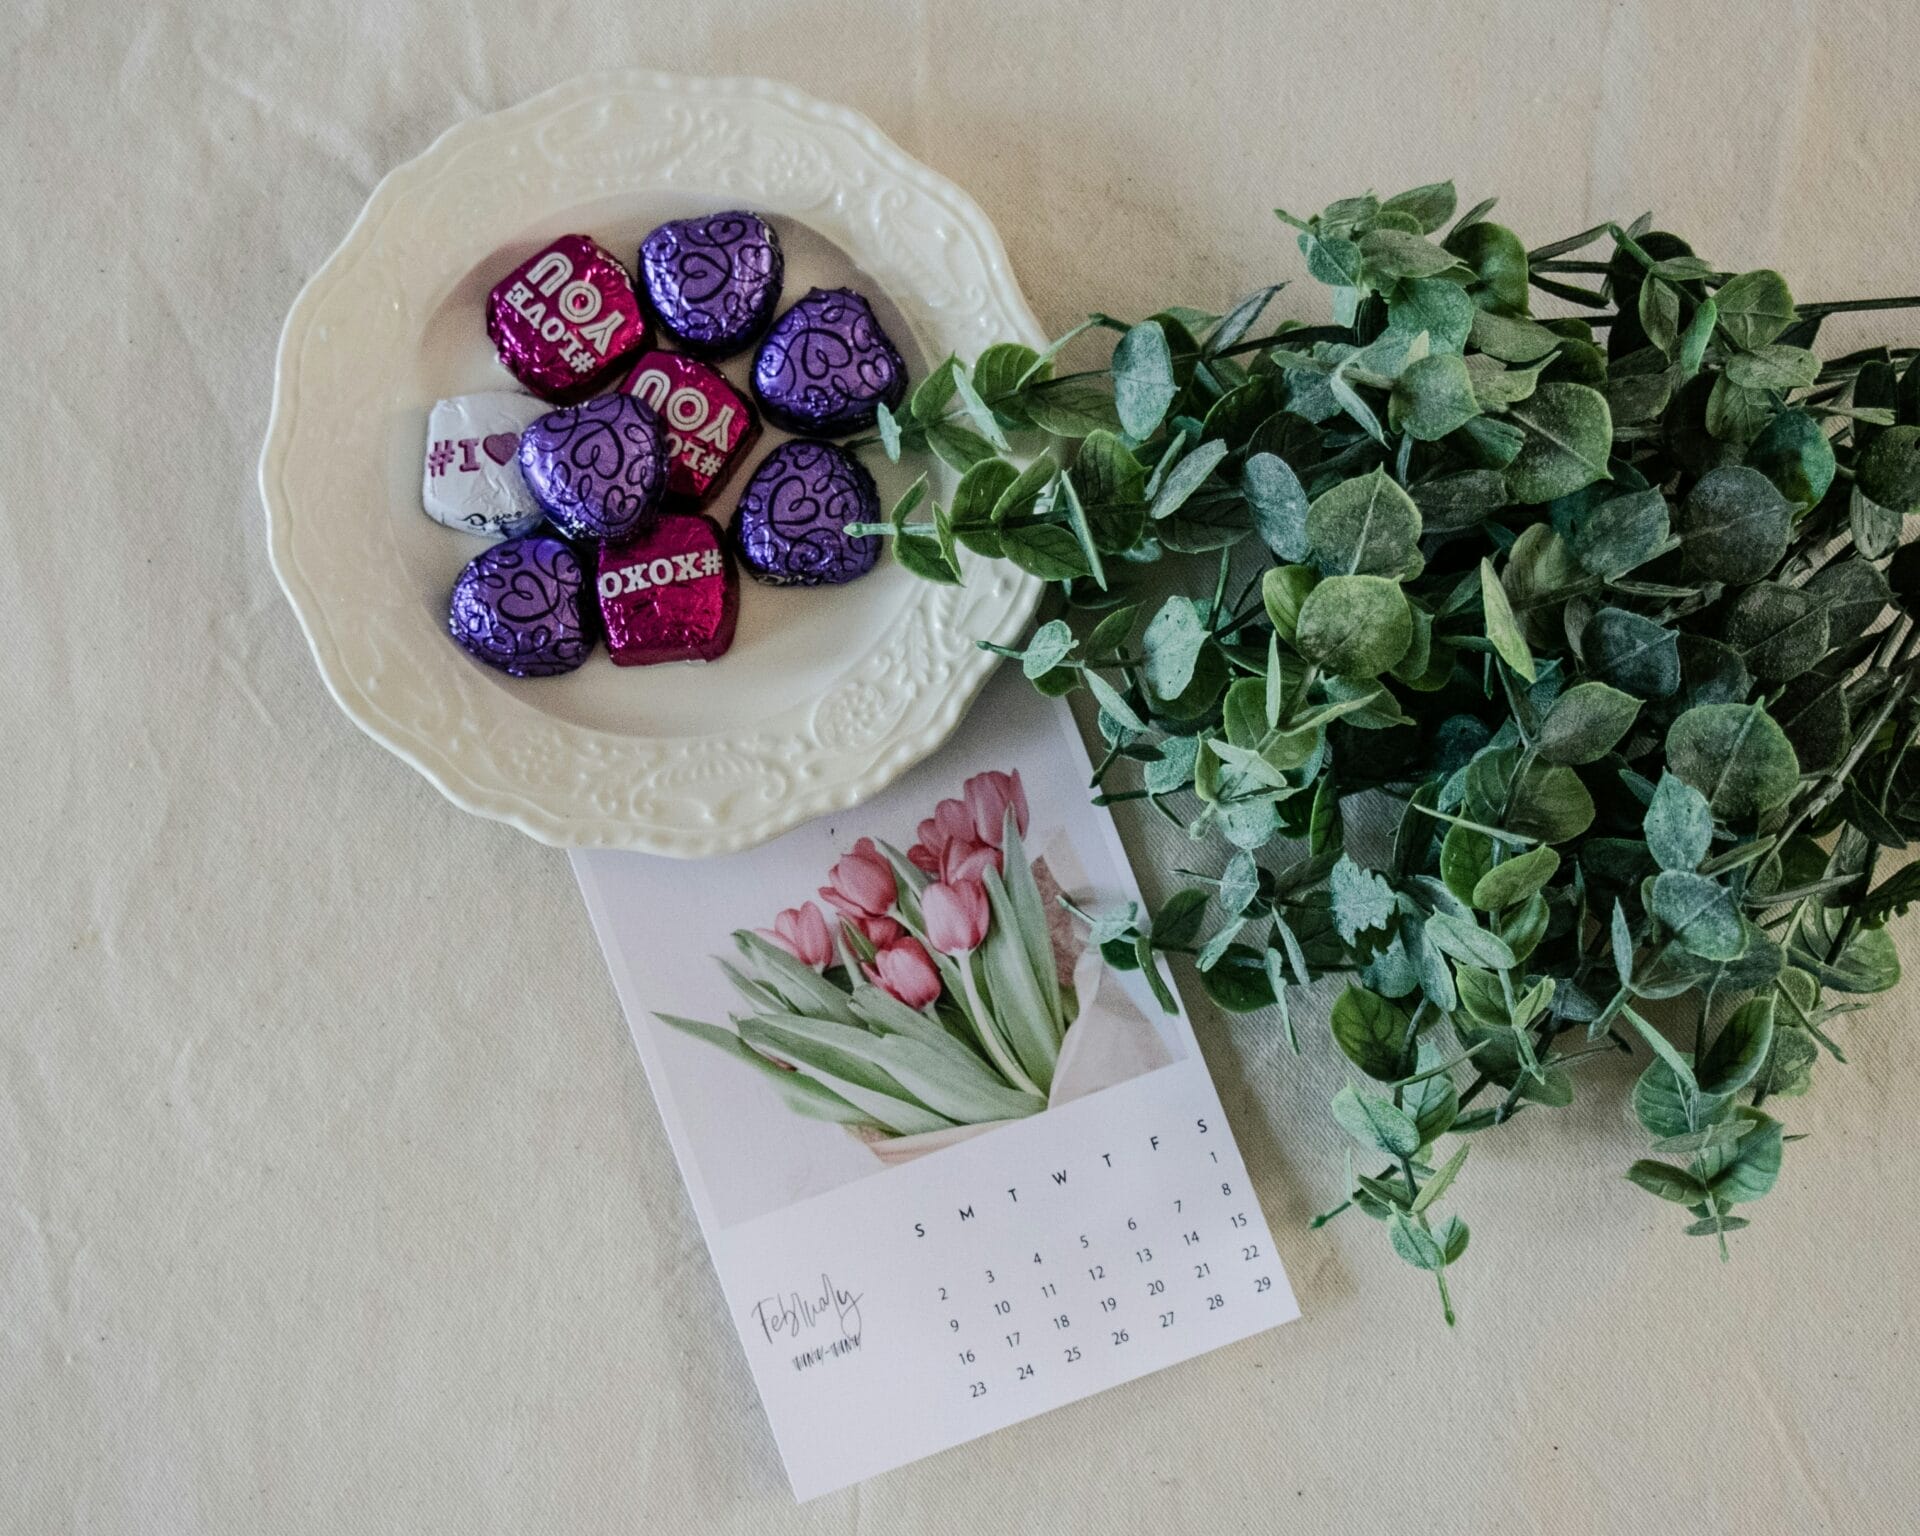 Green eucalyptus stems next to a ceramic bowl with chocolate hearts, each wrapped in purple or red foil